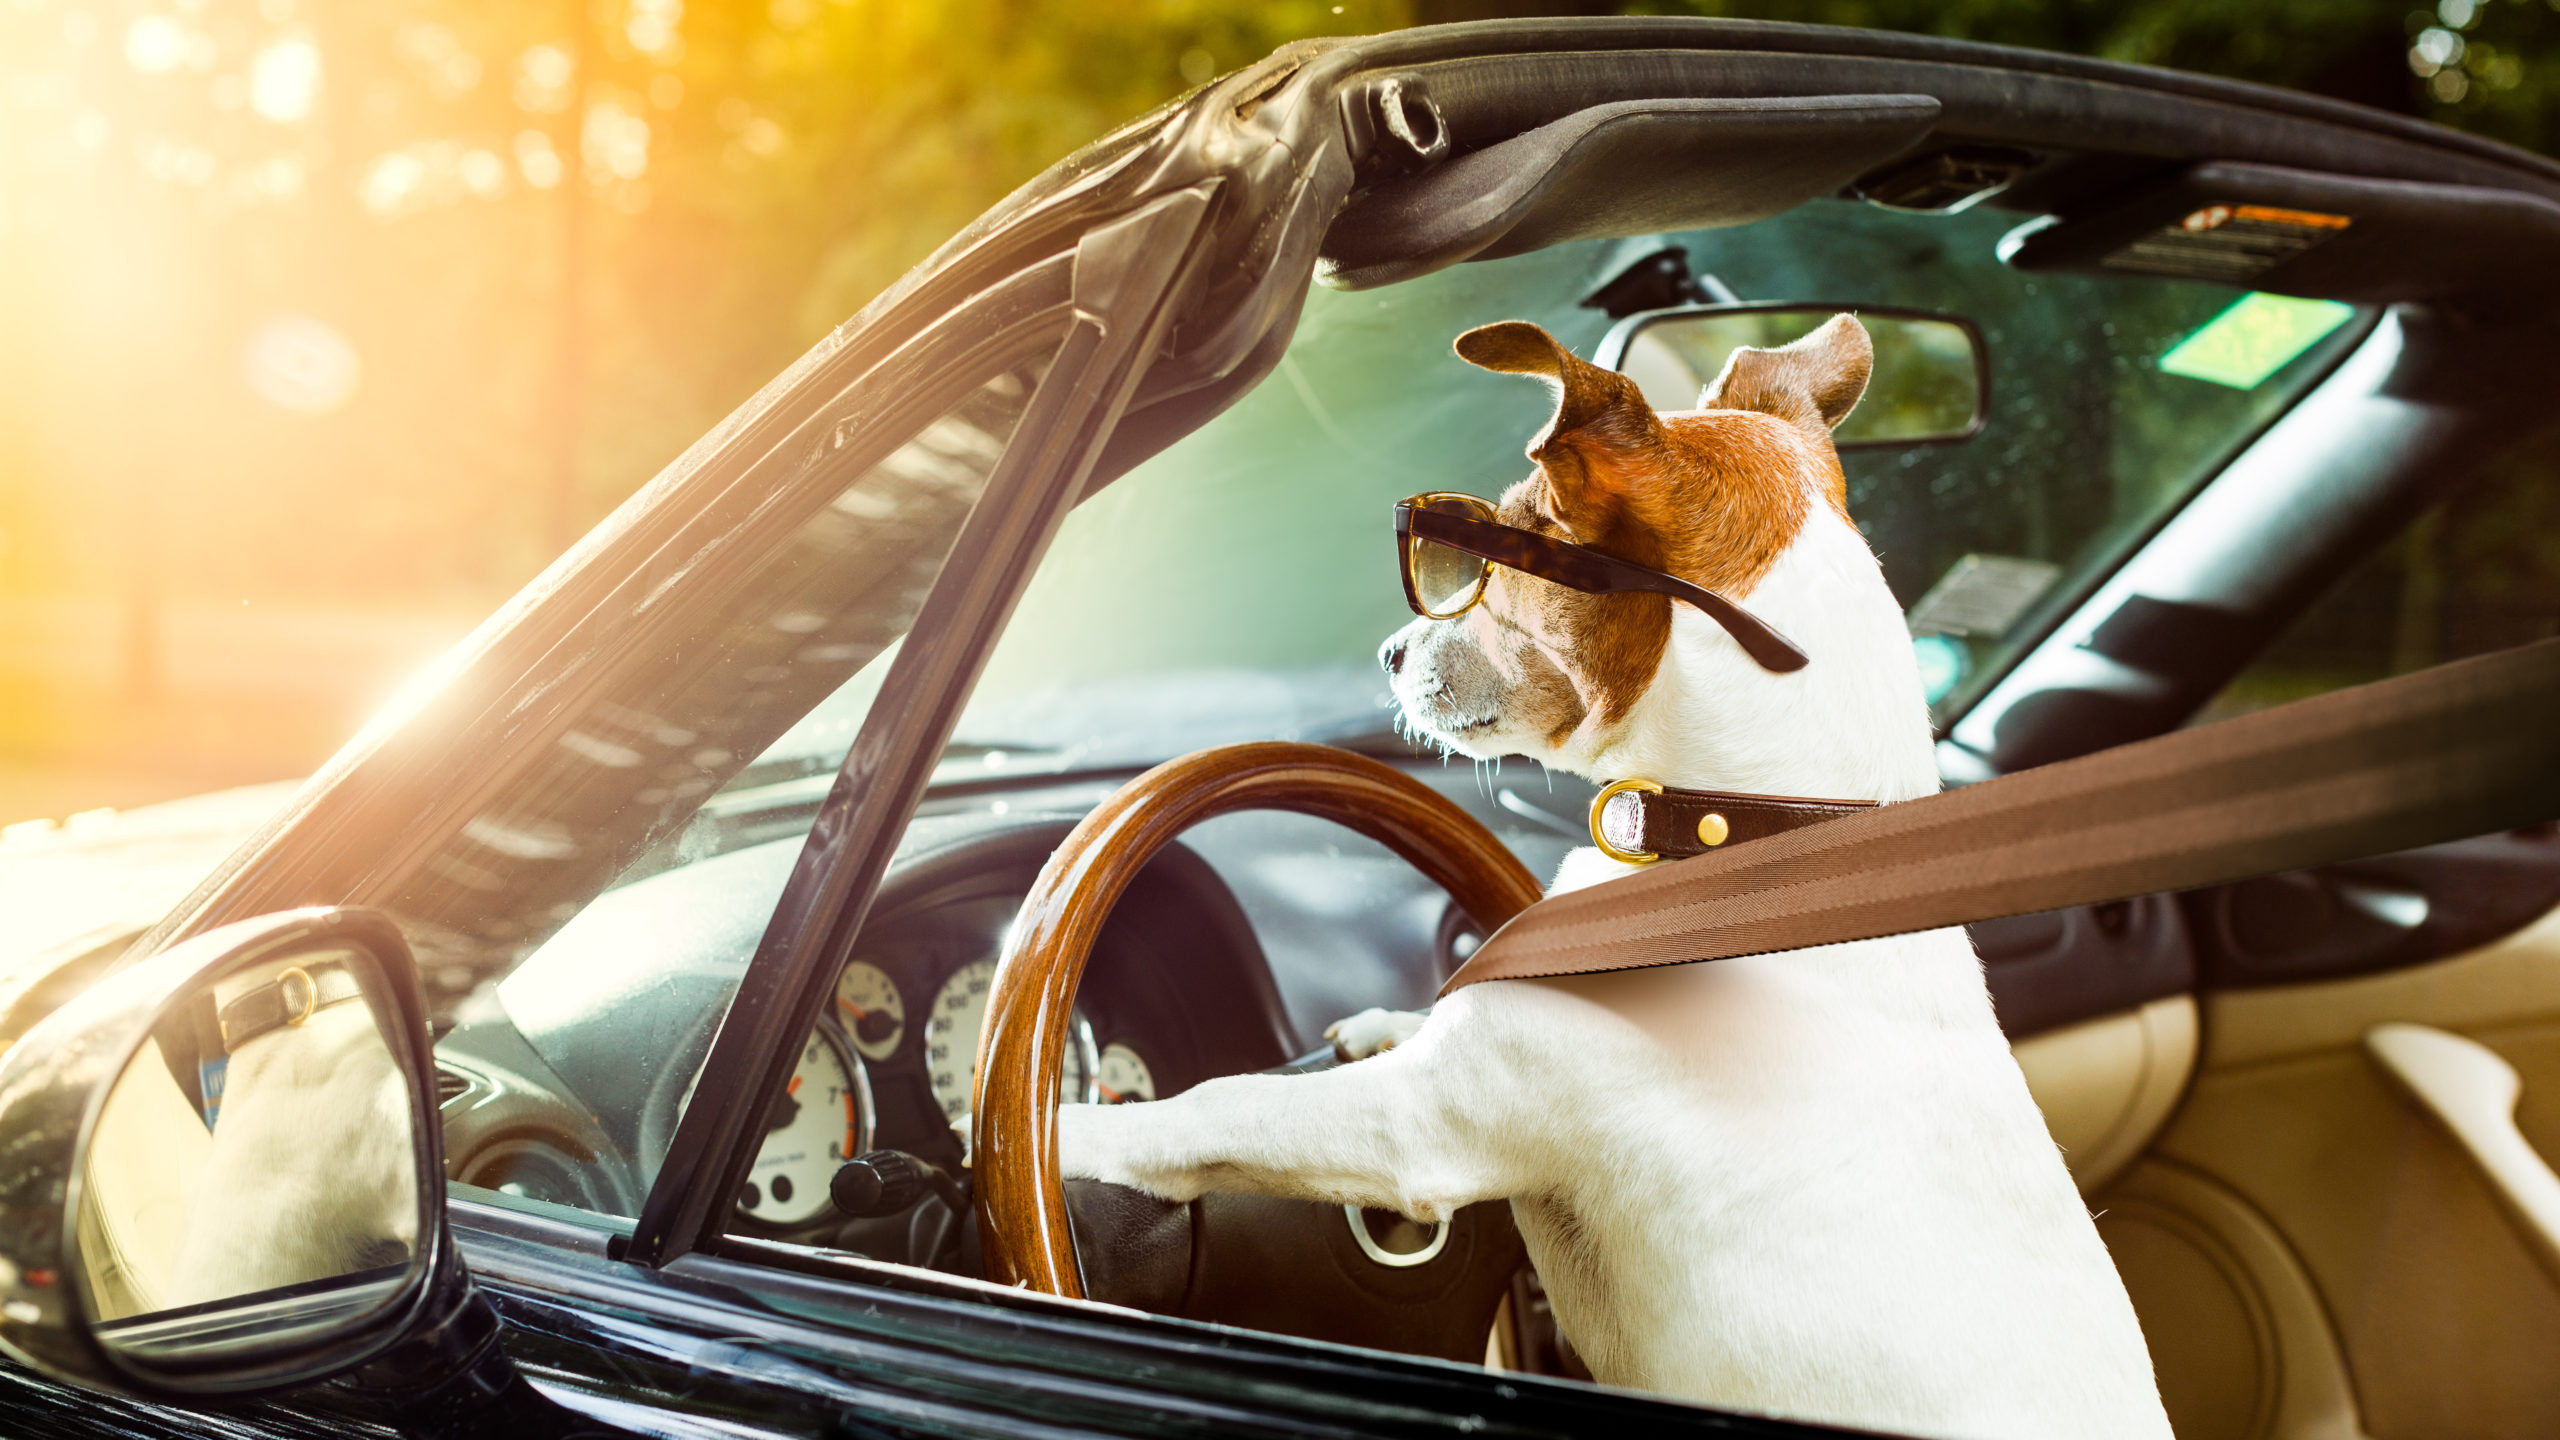 How to Safely Take Car Rides With Your Dog